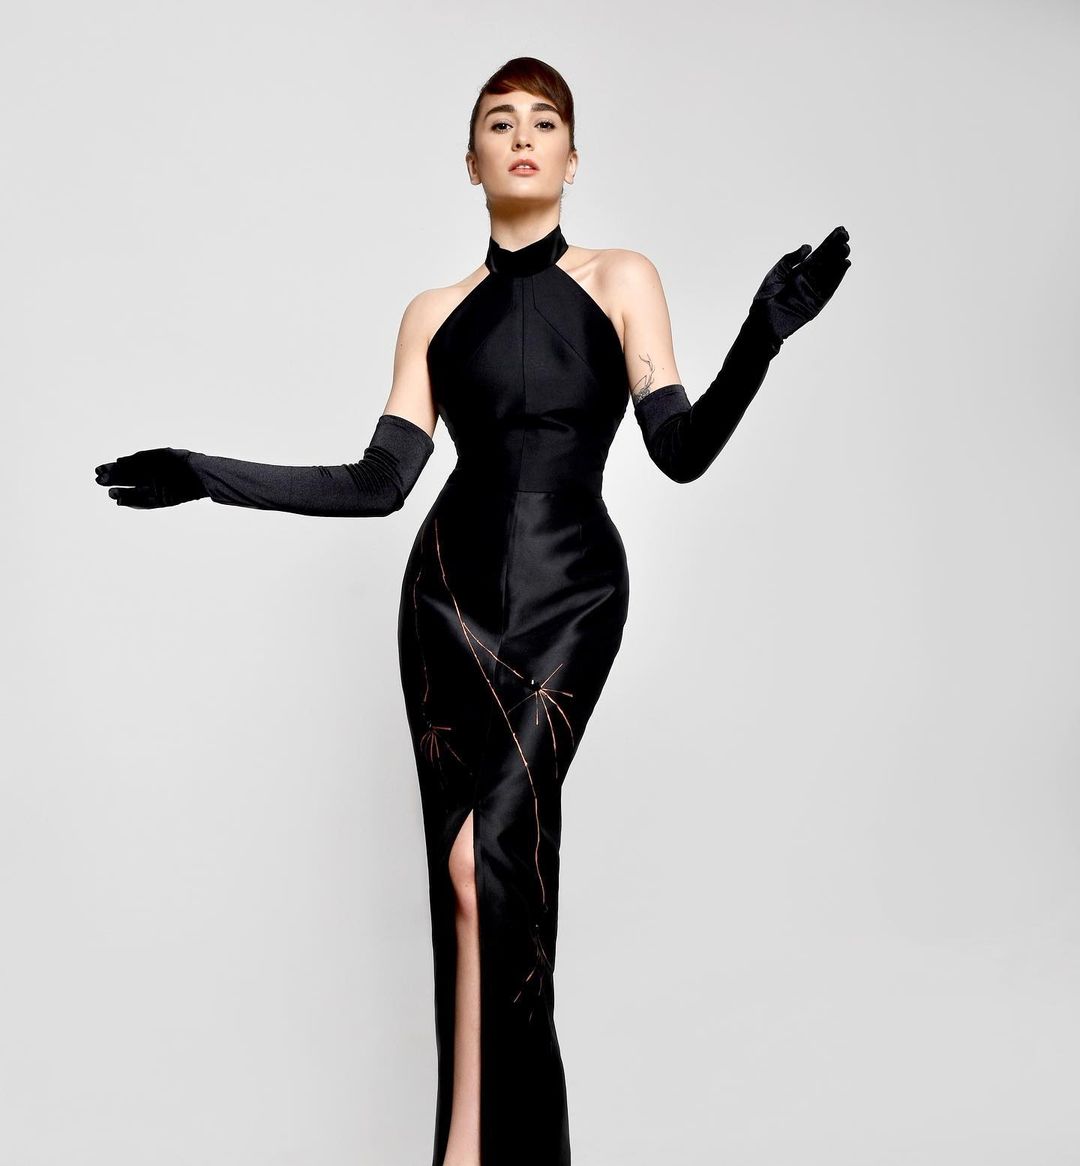 Classic black dress, with modern cuts and unique hand drawing